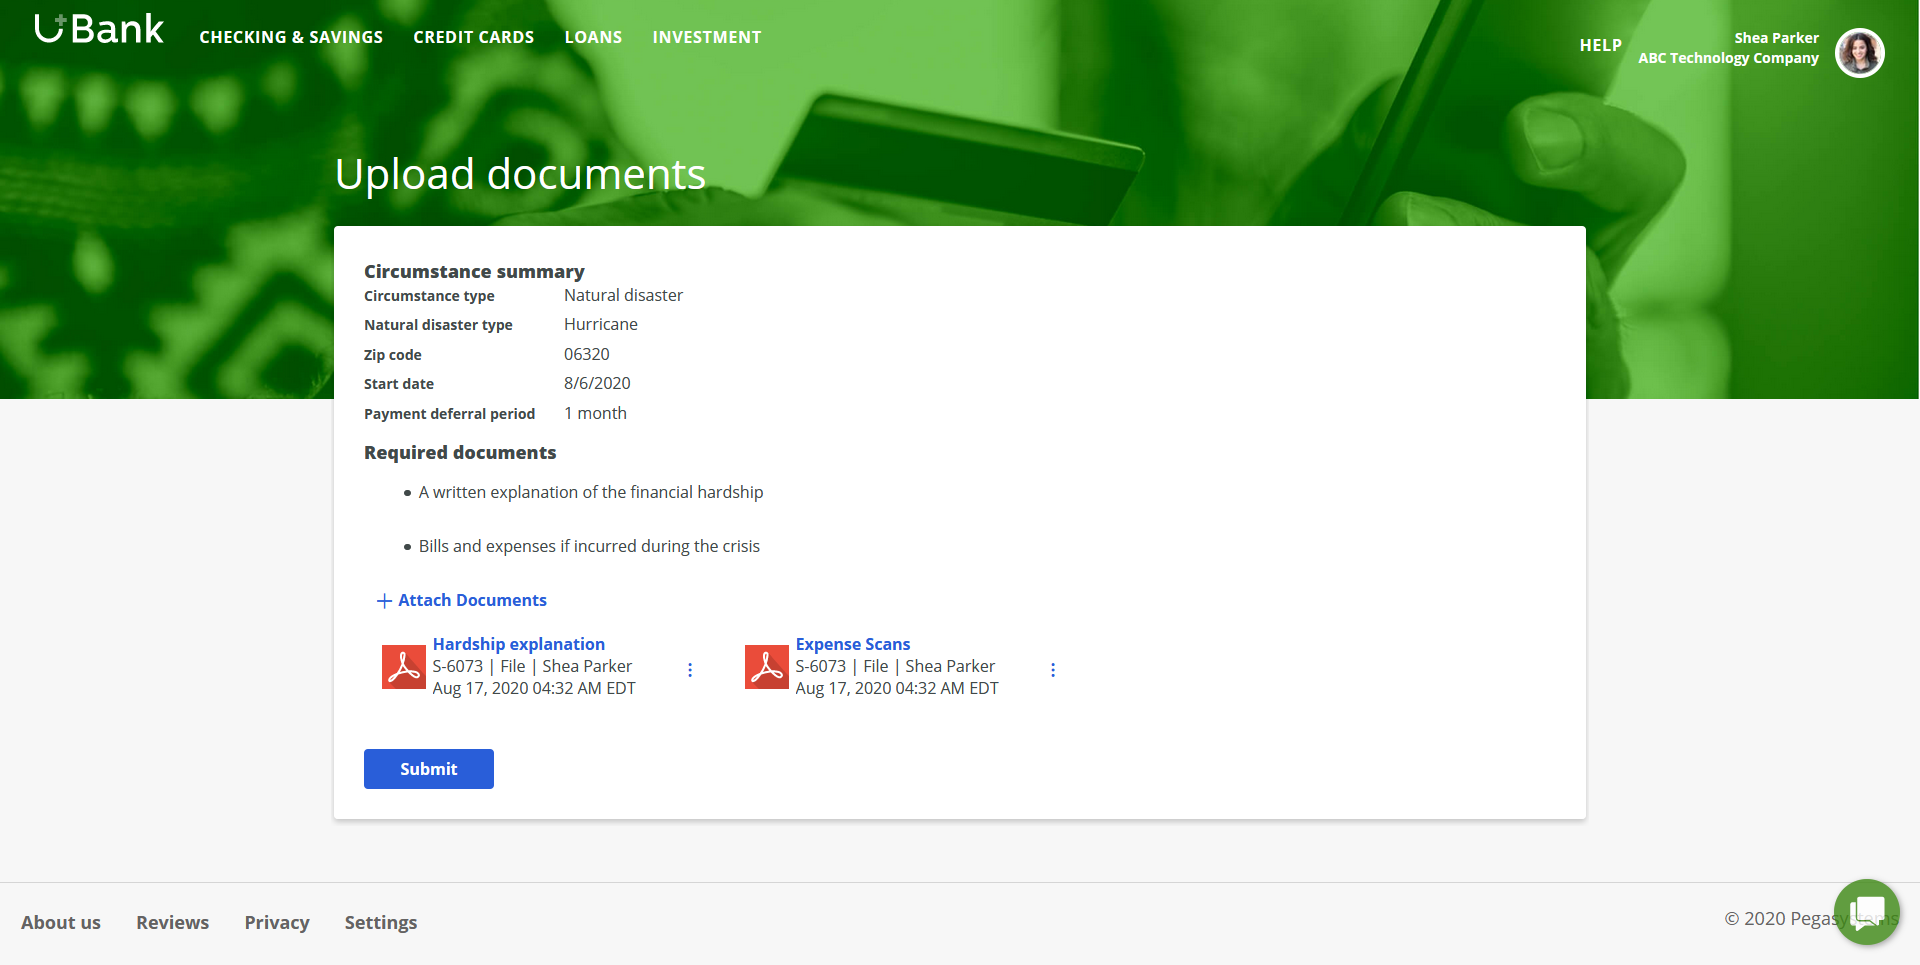 Uploading documents, including description of financial hardship and bills and expenses